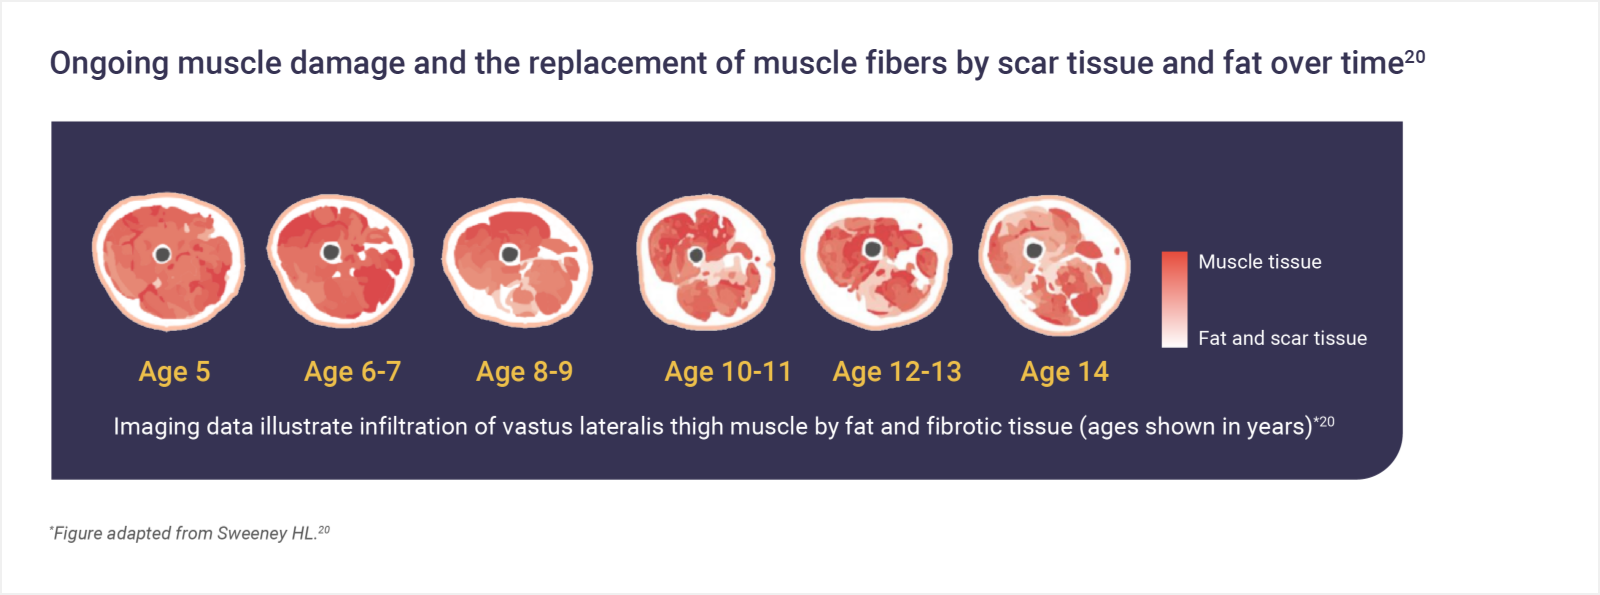 Infographic: Ongoing muscle damage and the replacement of muscle fibers by scar tissue and fat over time